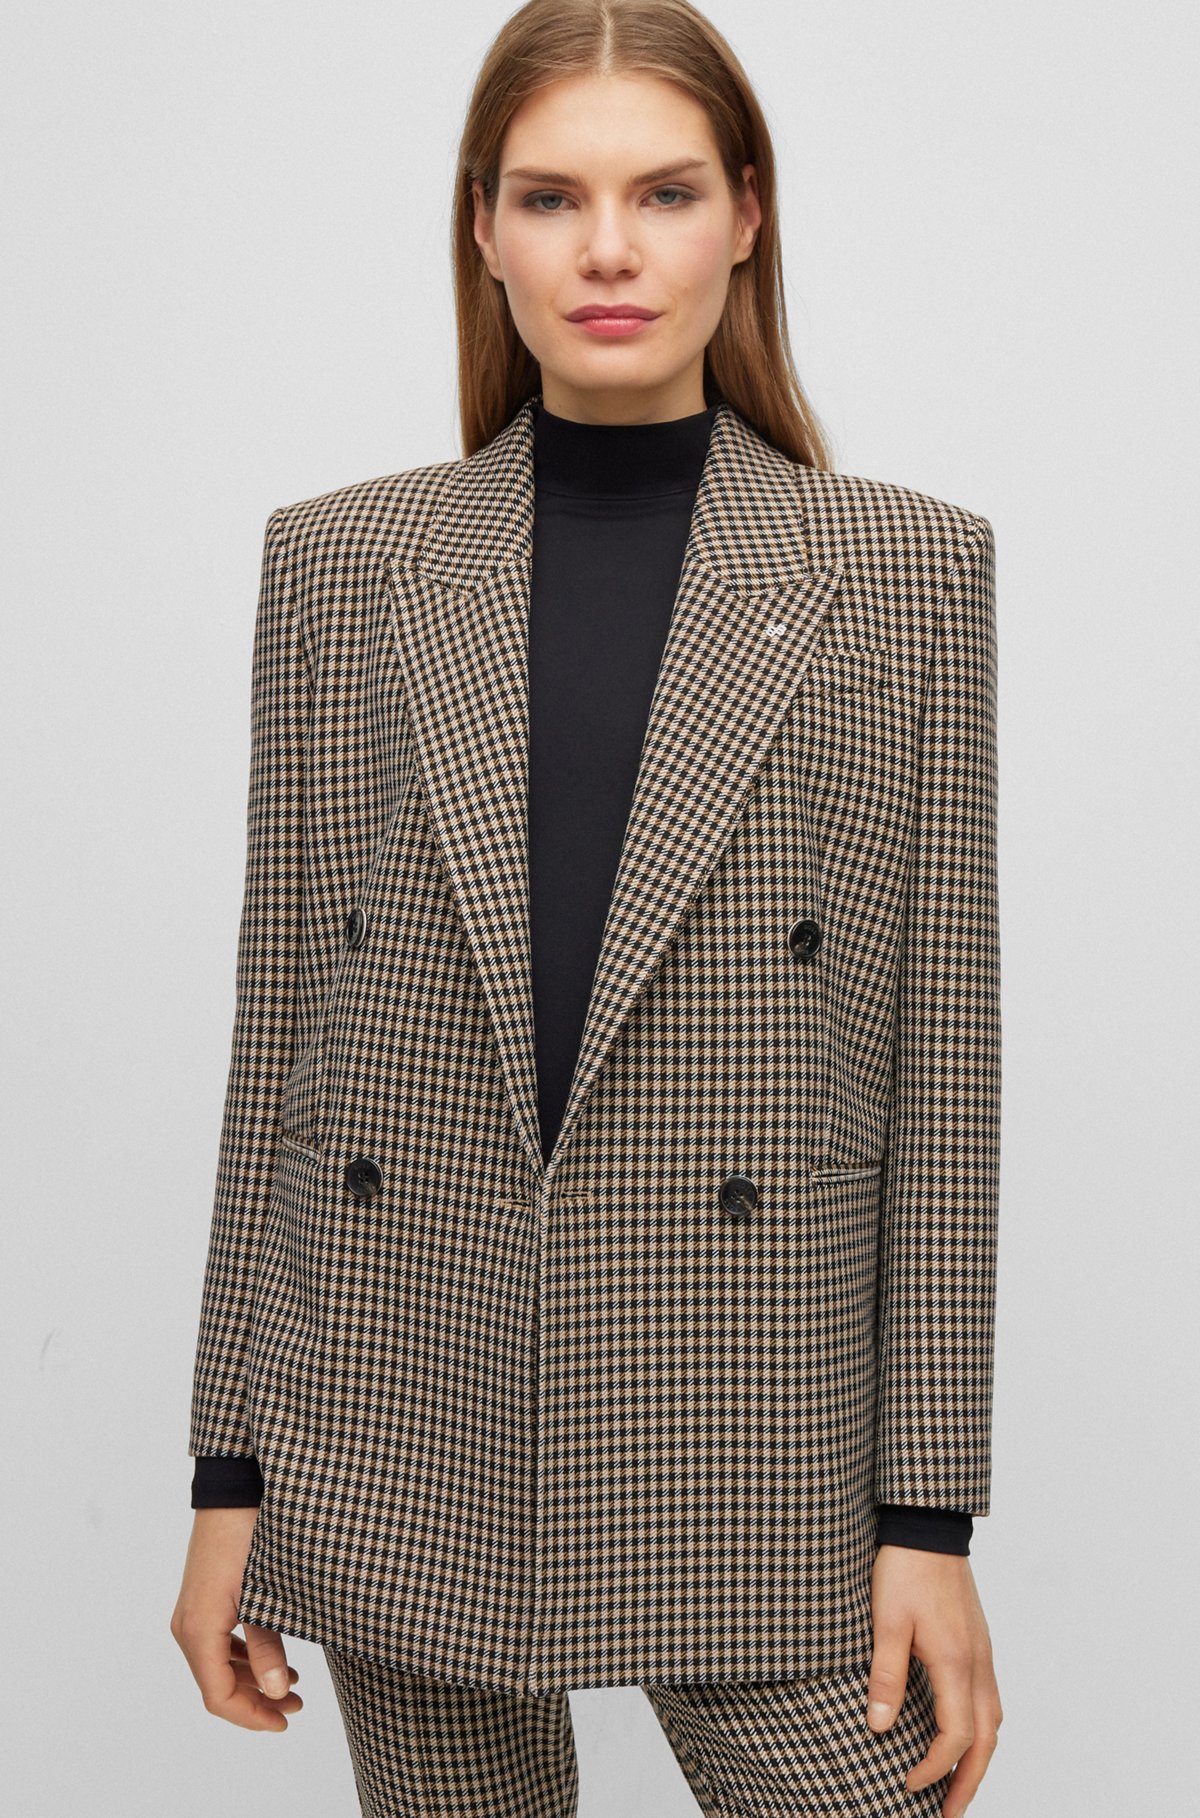 BOSS - Double-breasted relaxed-fit jacket in houndstooth stretch cloth